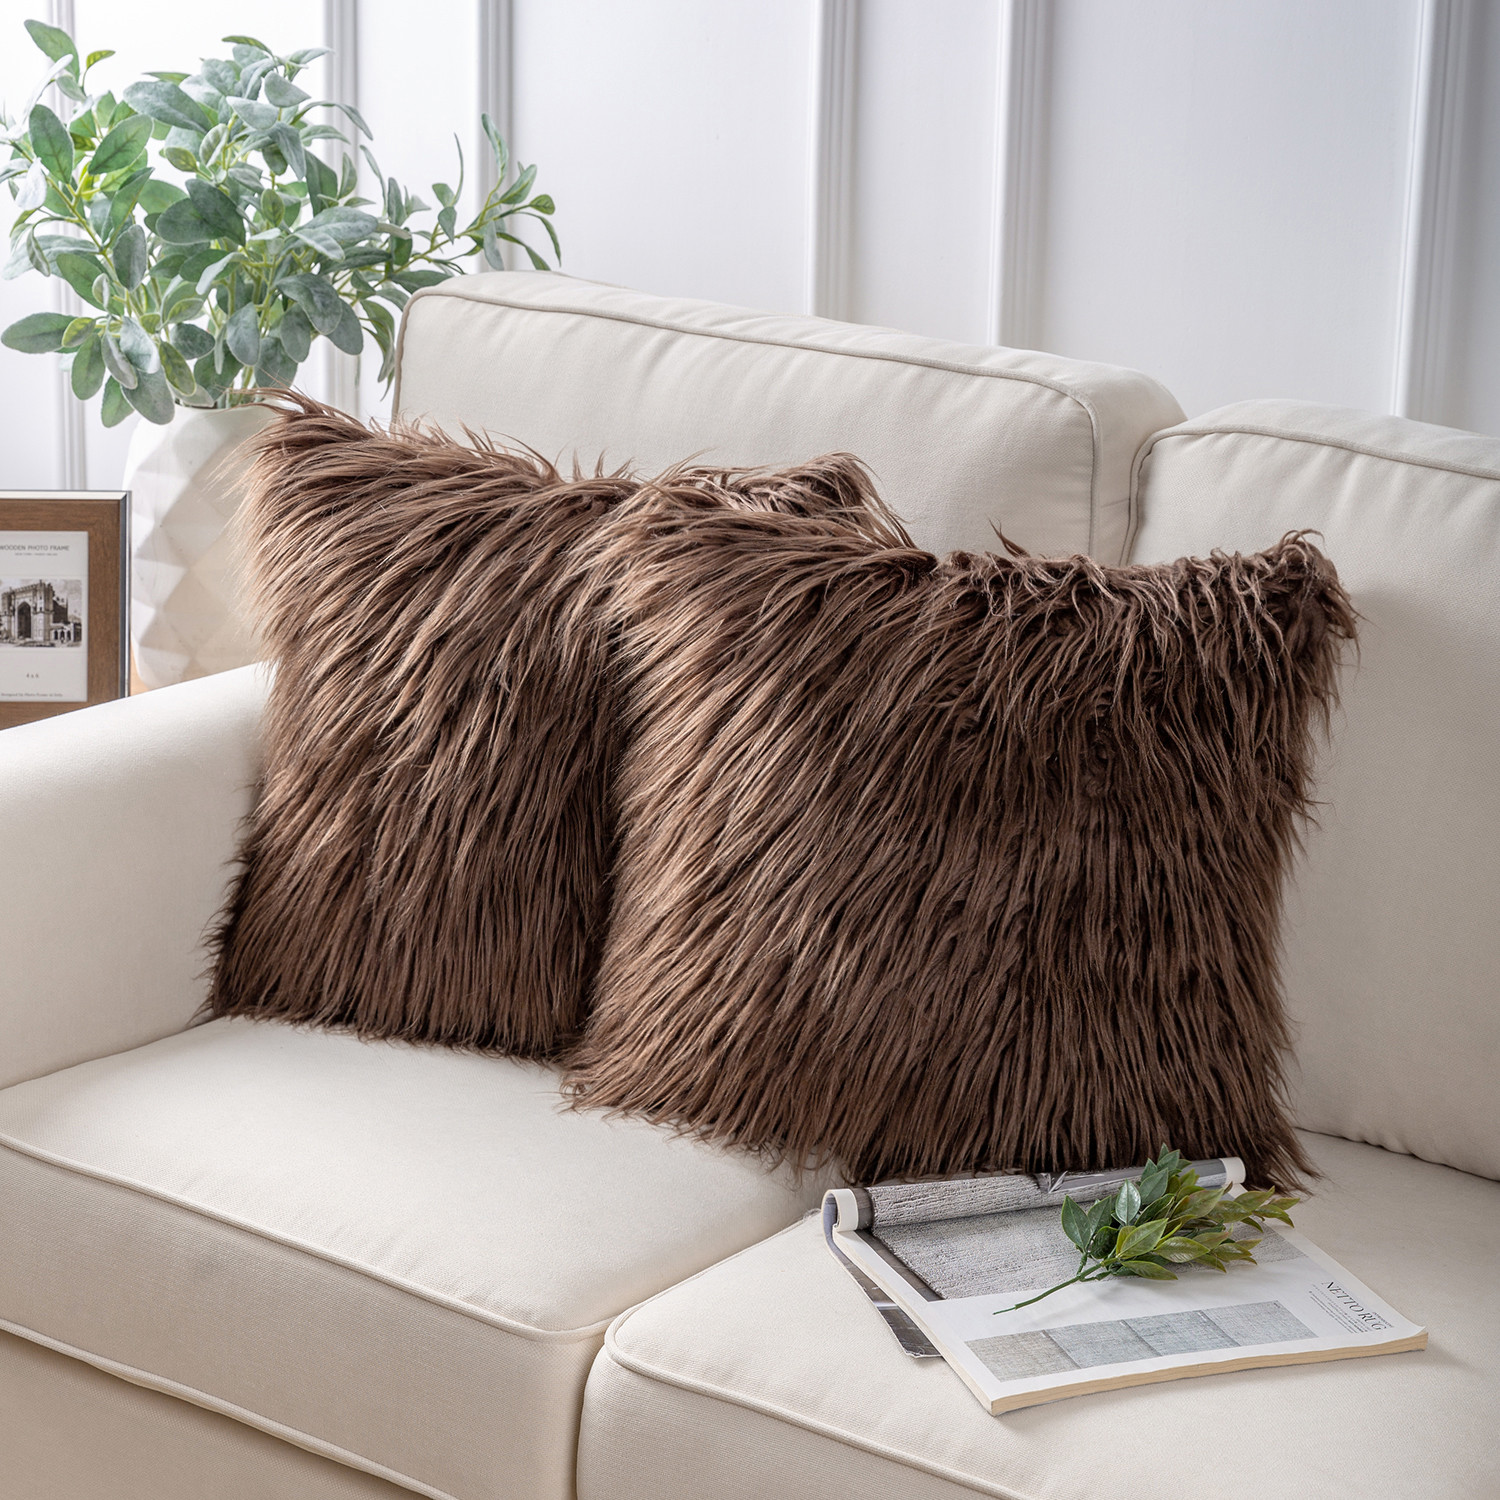 White 12 x 20 inches 30 x 50 cm Phantoscope Pack of 2 Luxury Series Throw Pillow Covers Faux Fur Mongolian Style Plush Cushion Case for Couch Bed and Chair